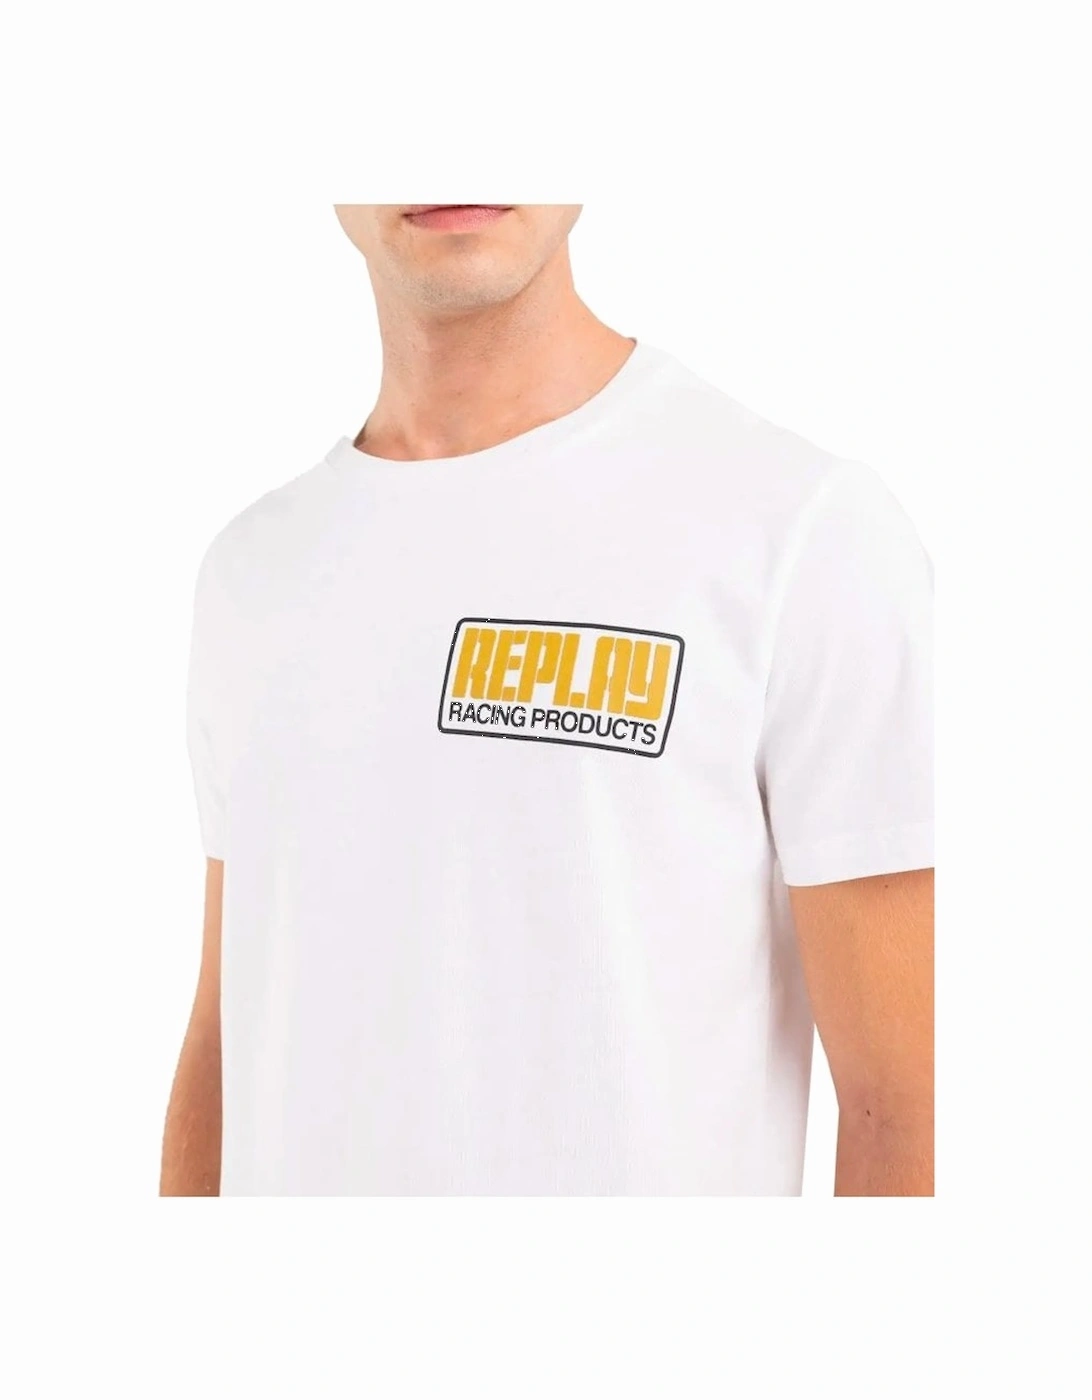 Racing Products T Shirt White